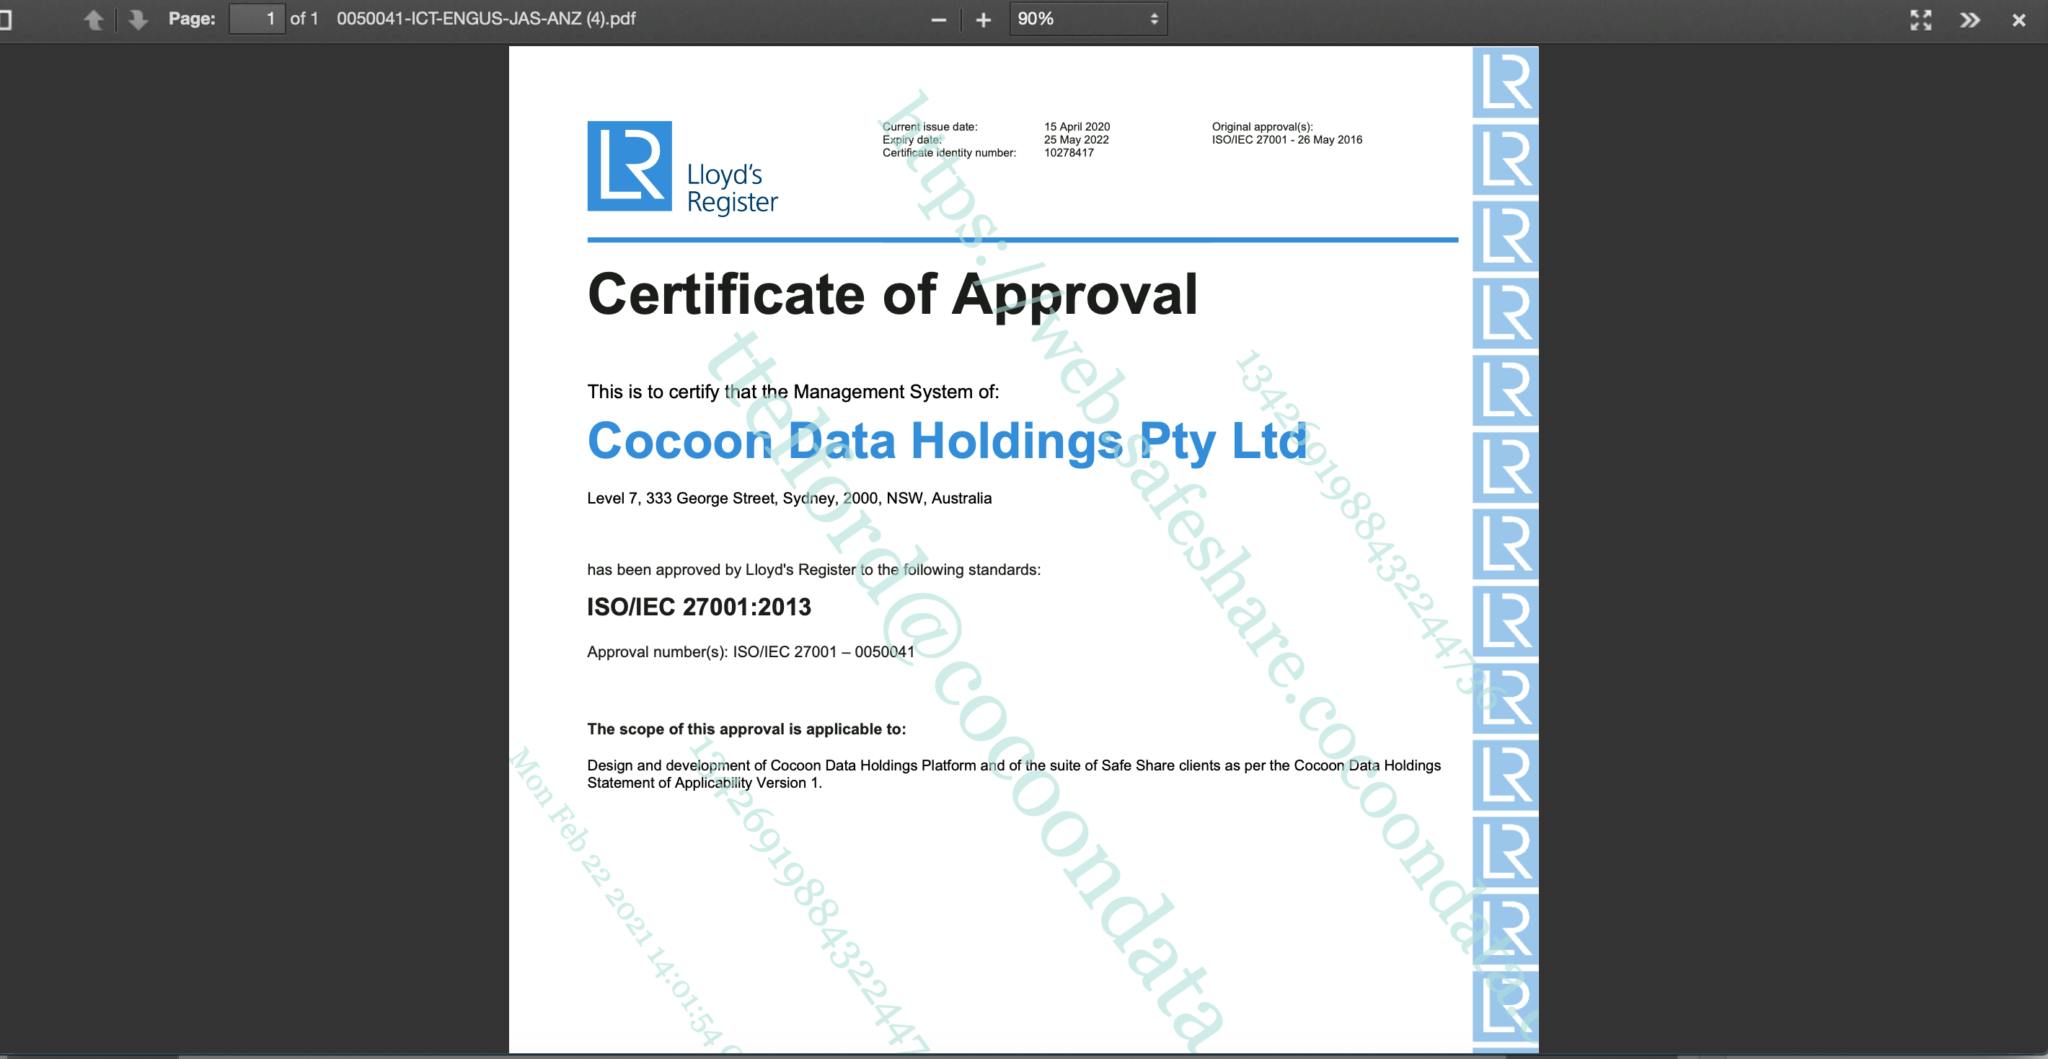 Certificate of Approval Image